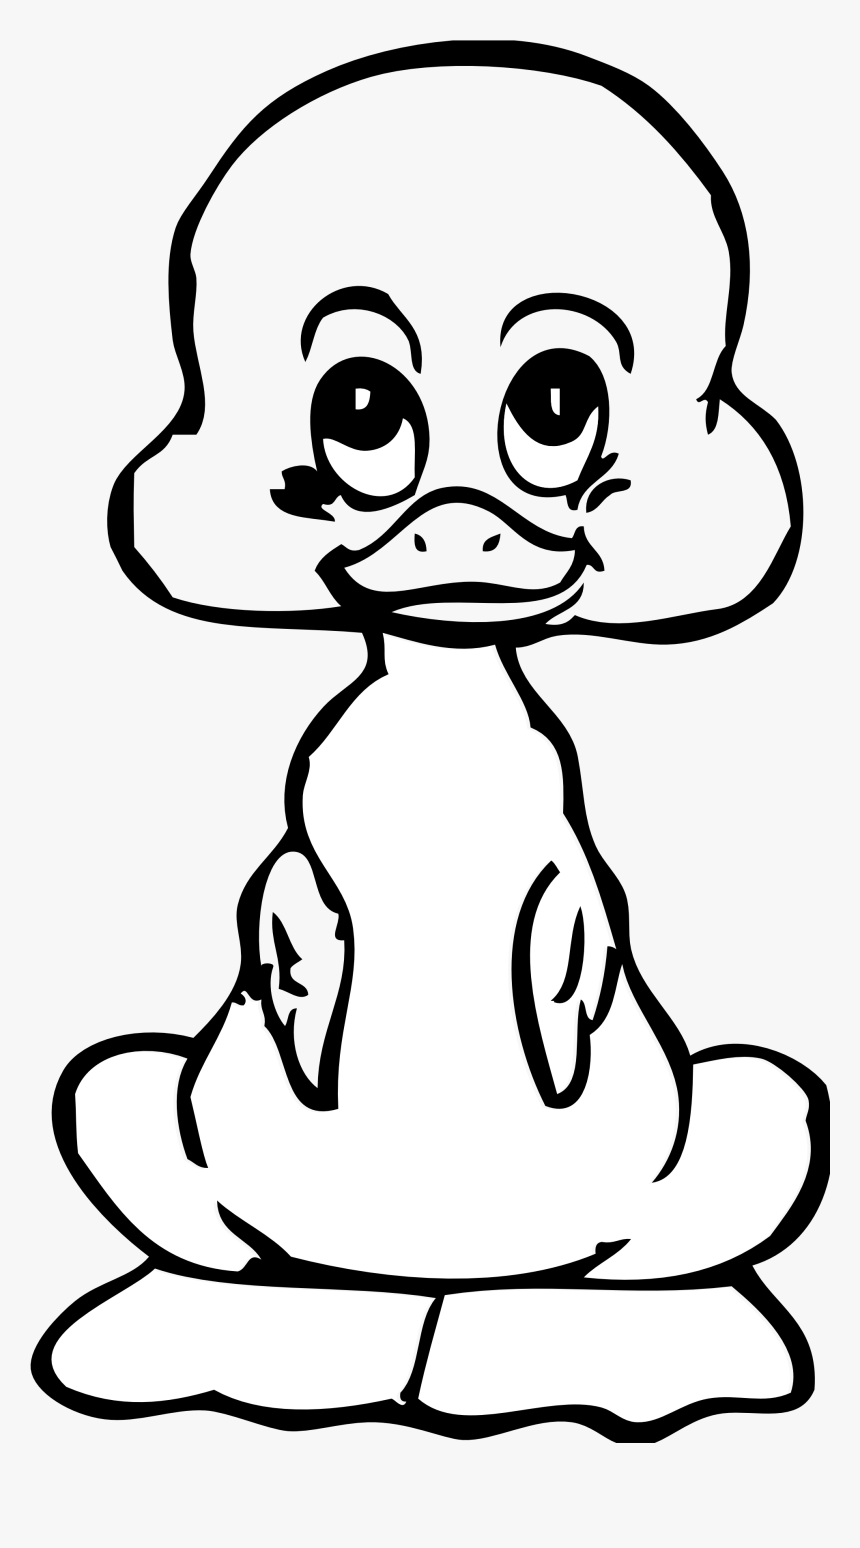 Cute Duck Png Black And White - Ugly Duckling Clipart Black And White, Transparent Png, Free Download